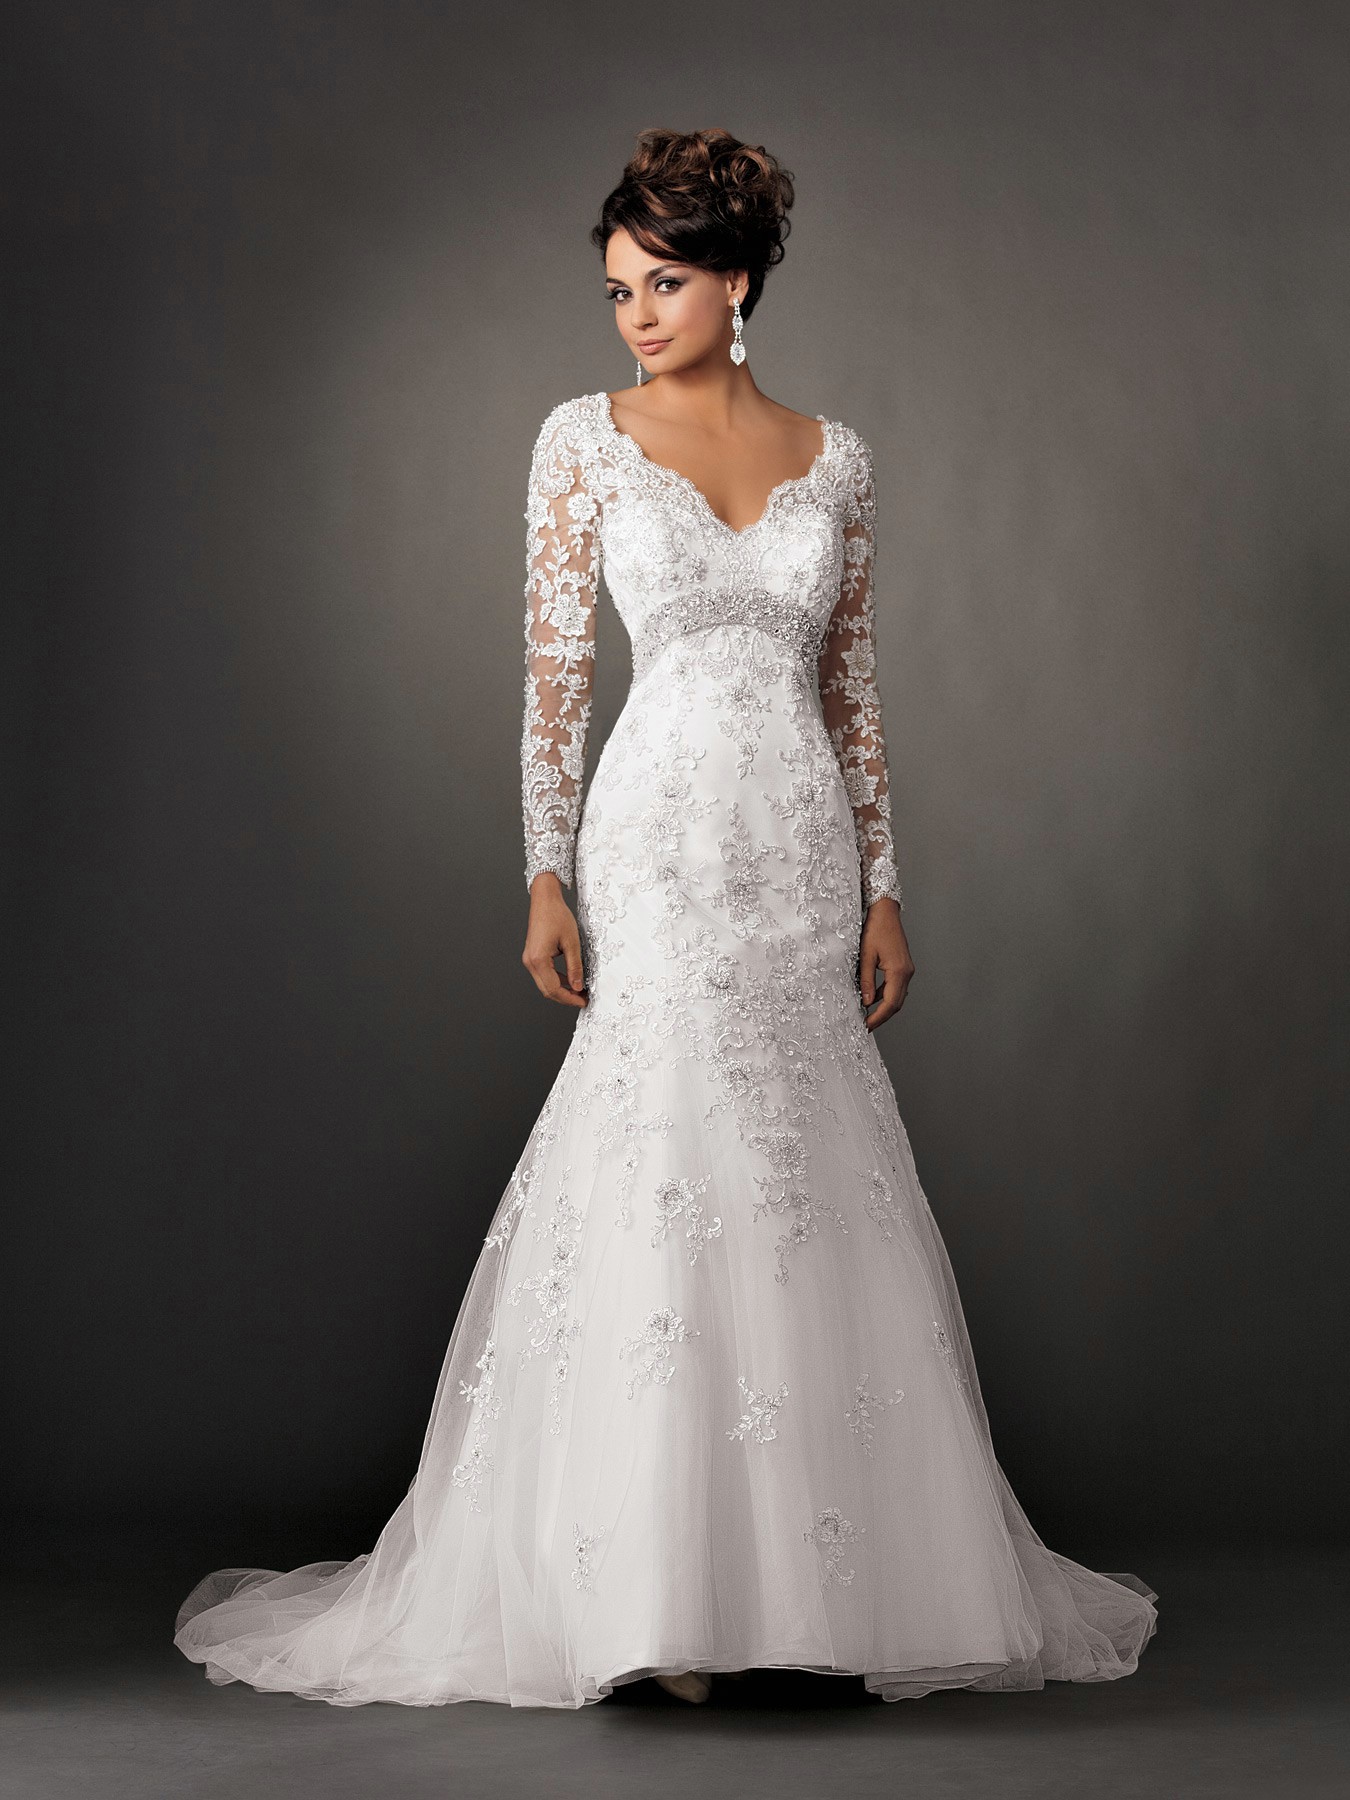 Lace Wedding Dress with Sleeves